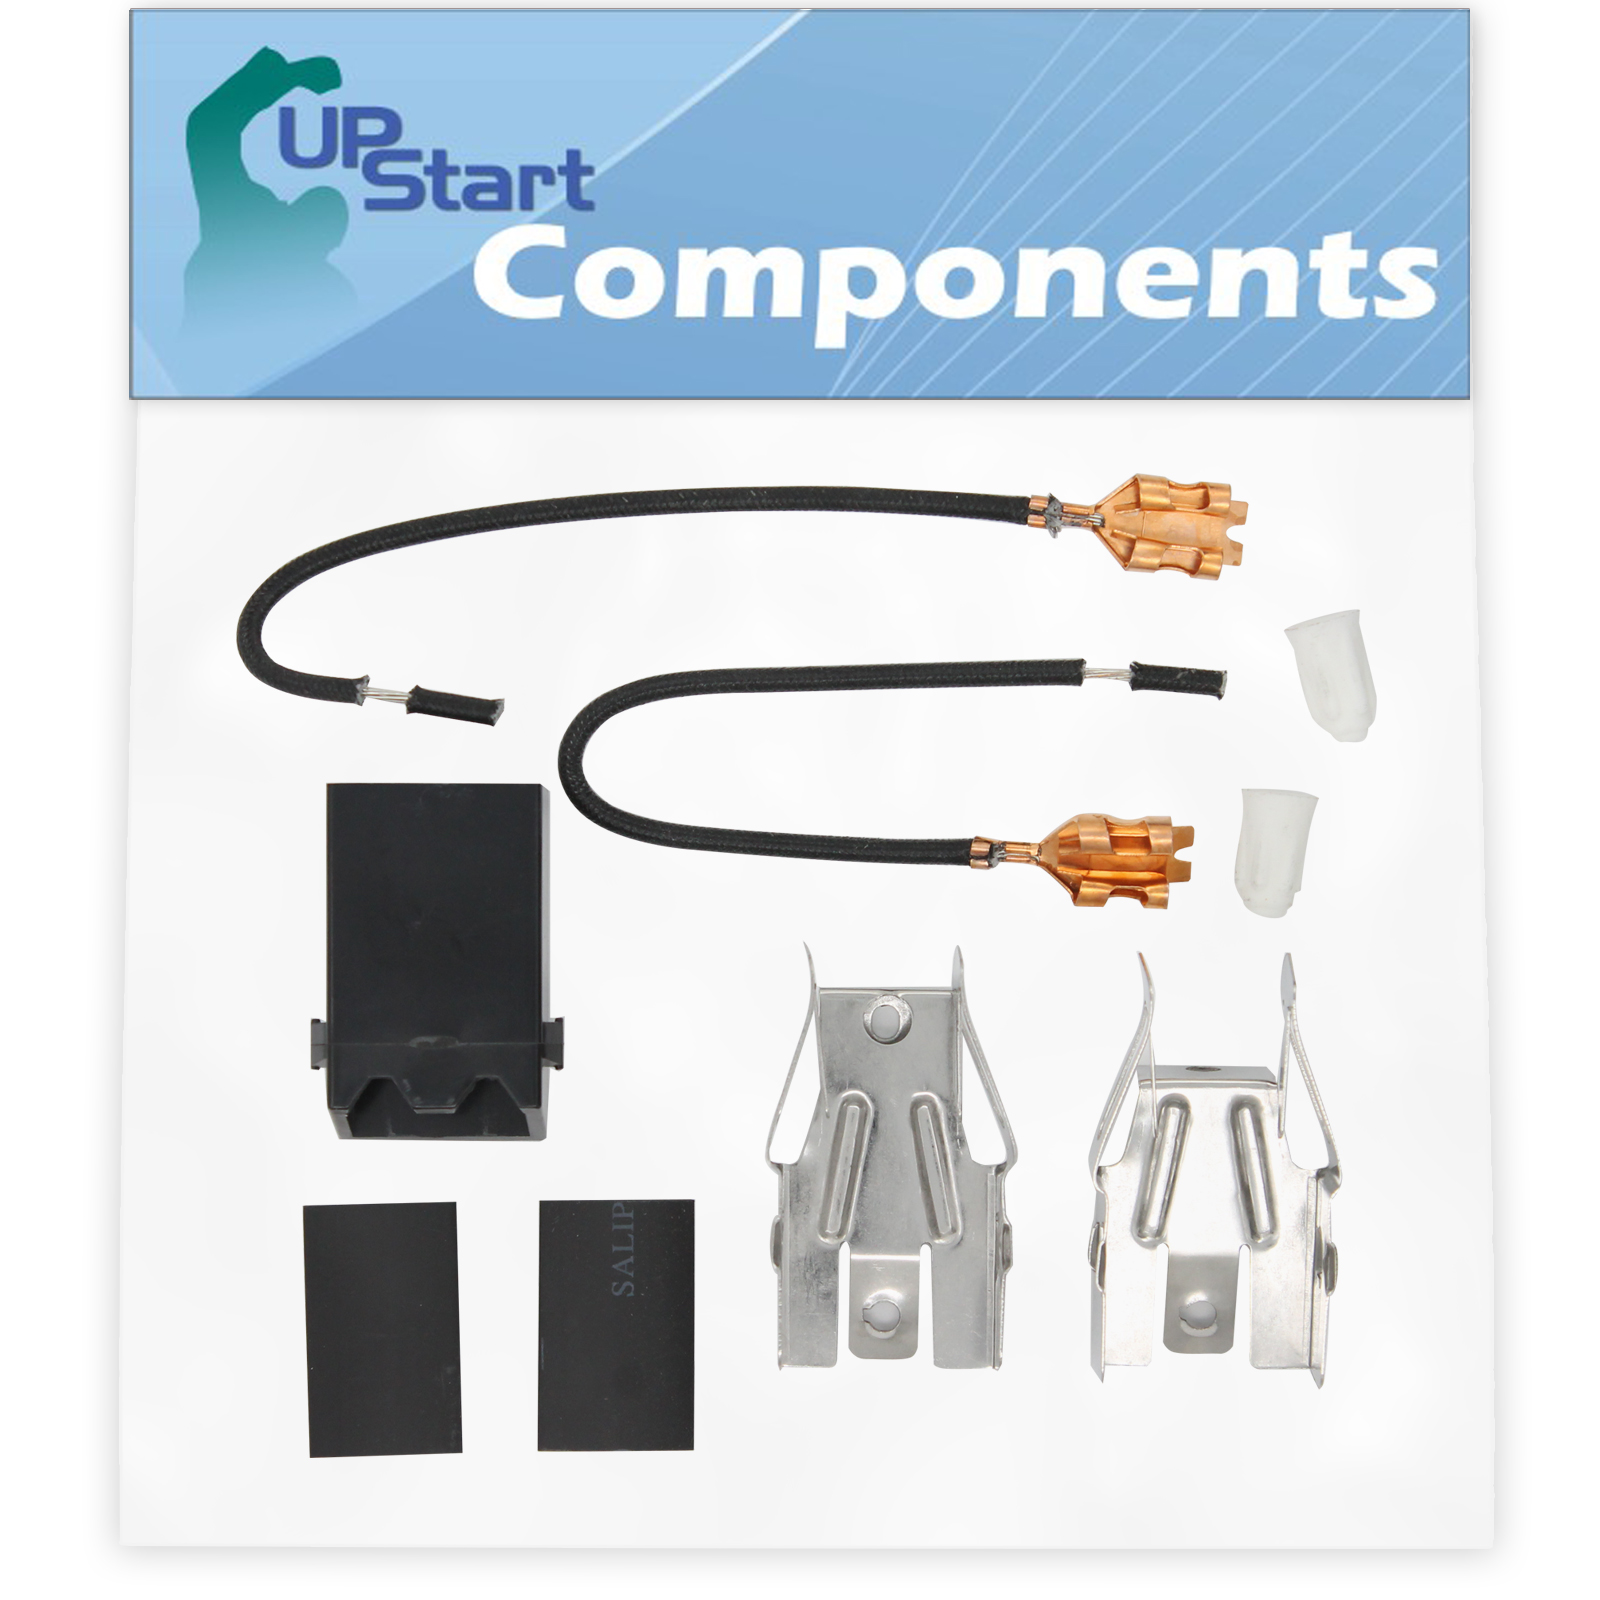 330031 Top Burner Receptacle Kit Replacement for Amana ARR624W1 (P1142679N W) Range/Cooktop/Oven - Compatible with 330031 Range Burner Receptacle Kit - UpStart Components Brand - image 1 of 4